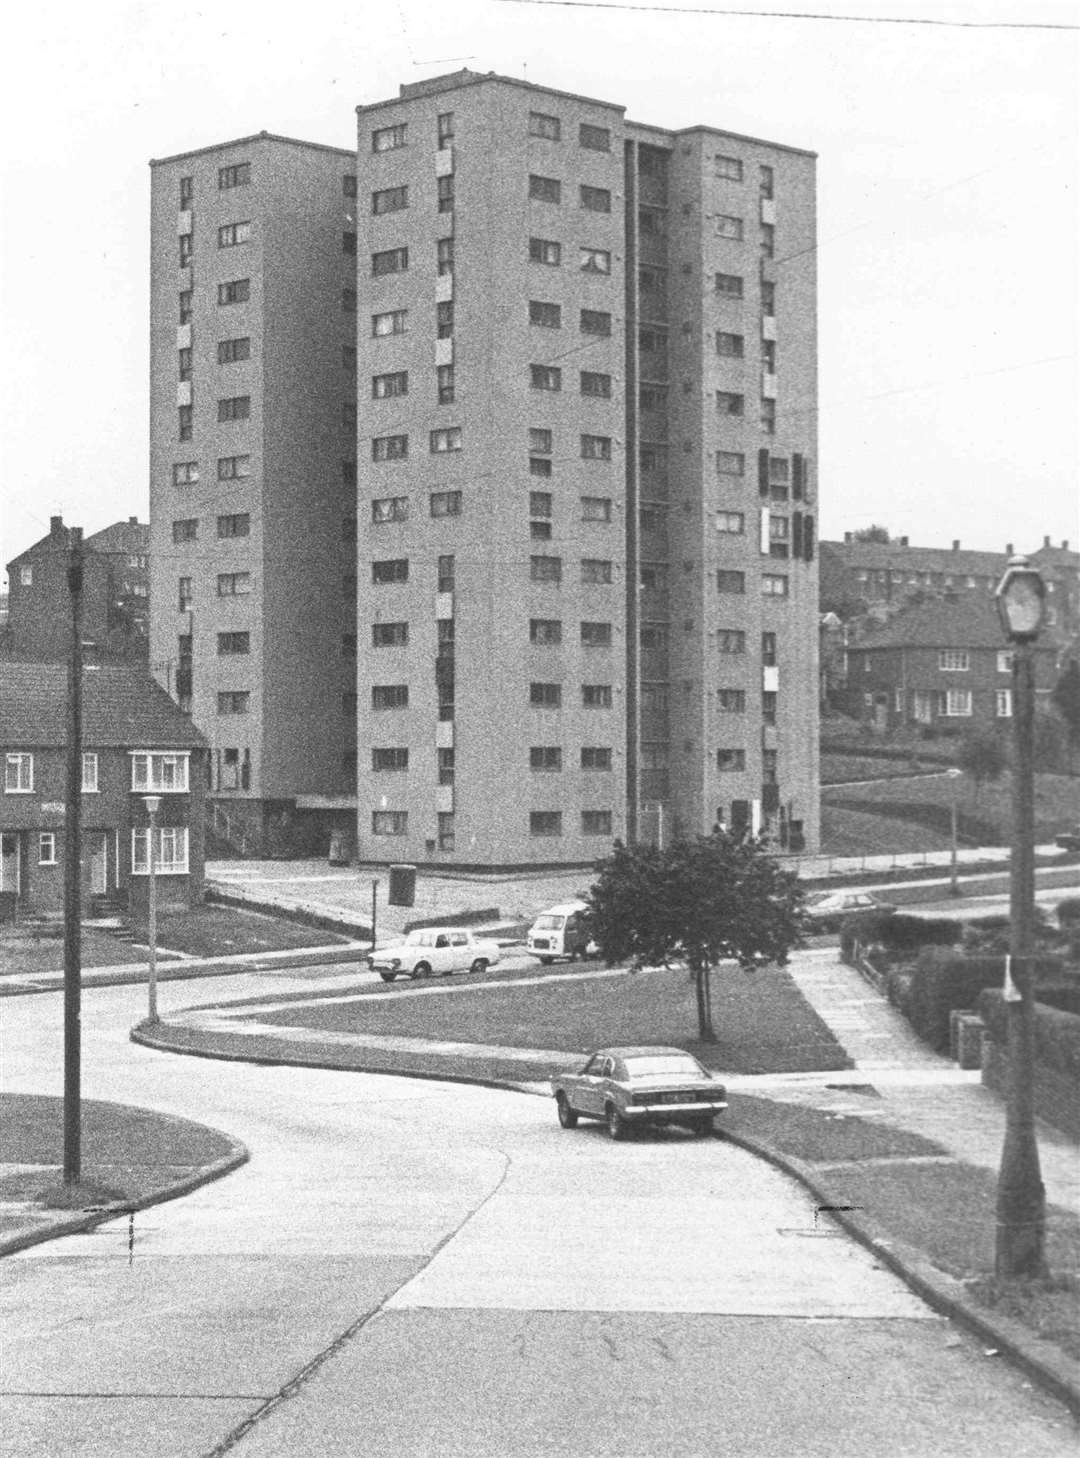 The 10-storey Fairbourne House tower block - nicknamed Faulty Tower - in The Tideway, Rochester, before its demolition in September, 1981